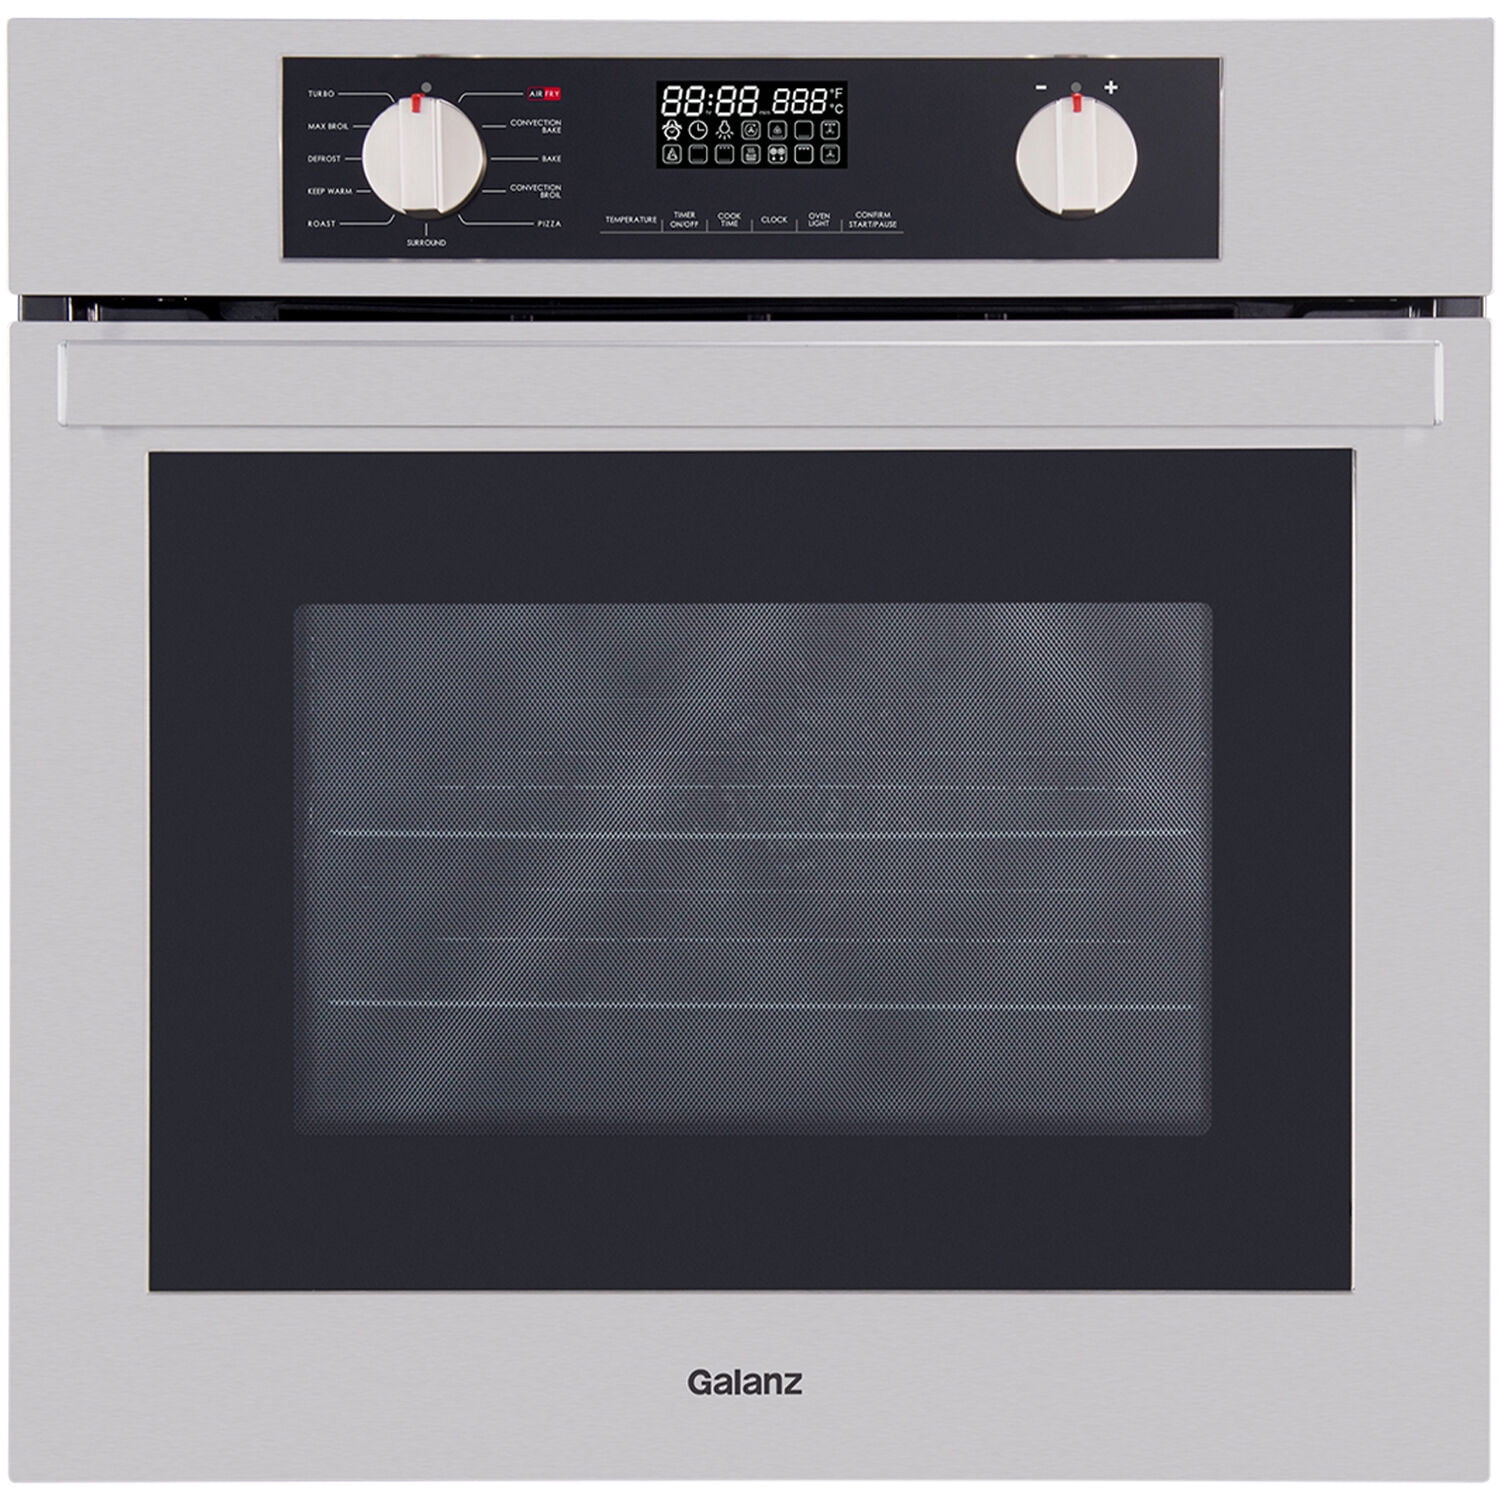 Galanz GL1BO24FSAN 2.3 cu. ft. True European Convection Wall Oven with Air Fry, Stainless Steel